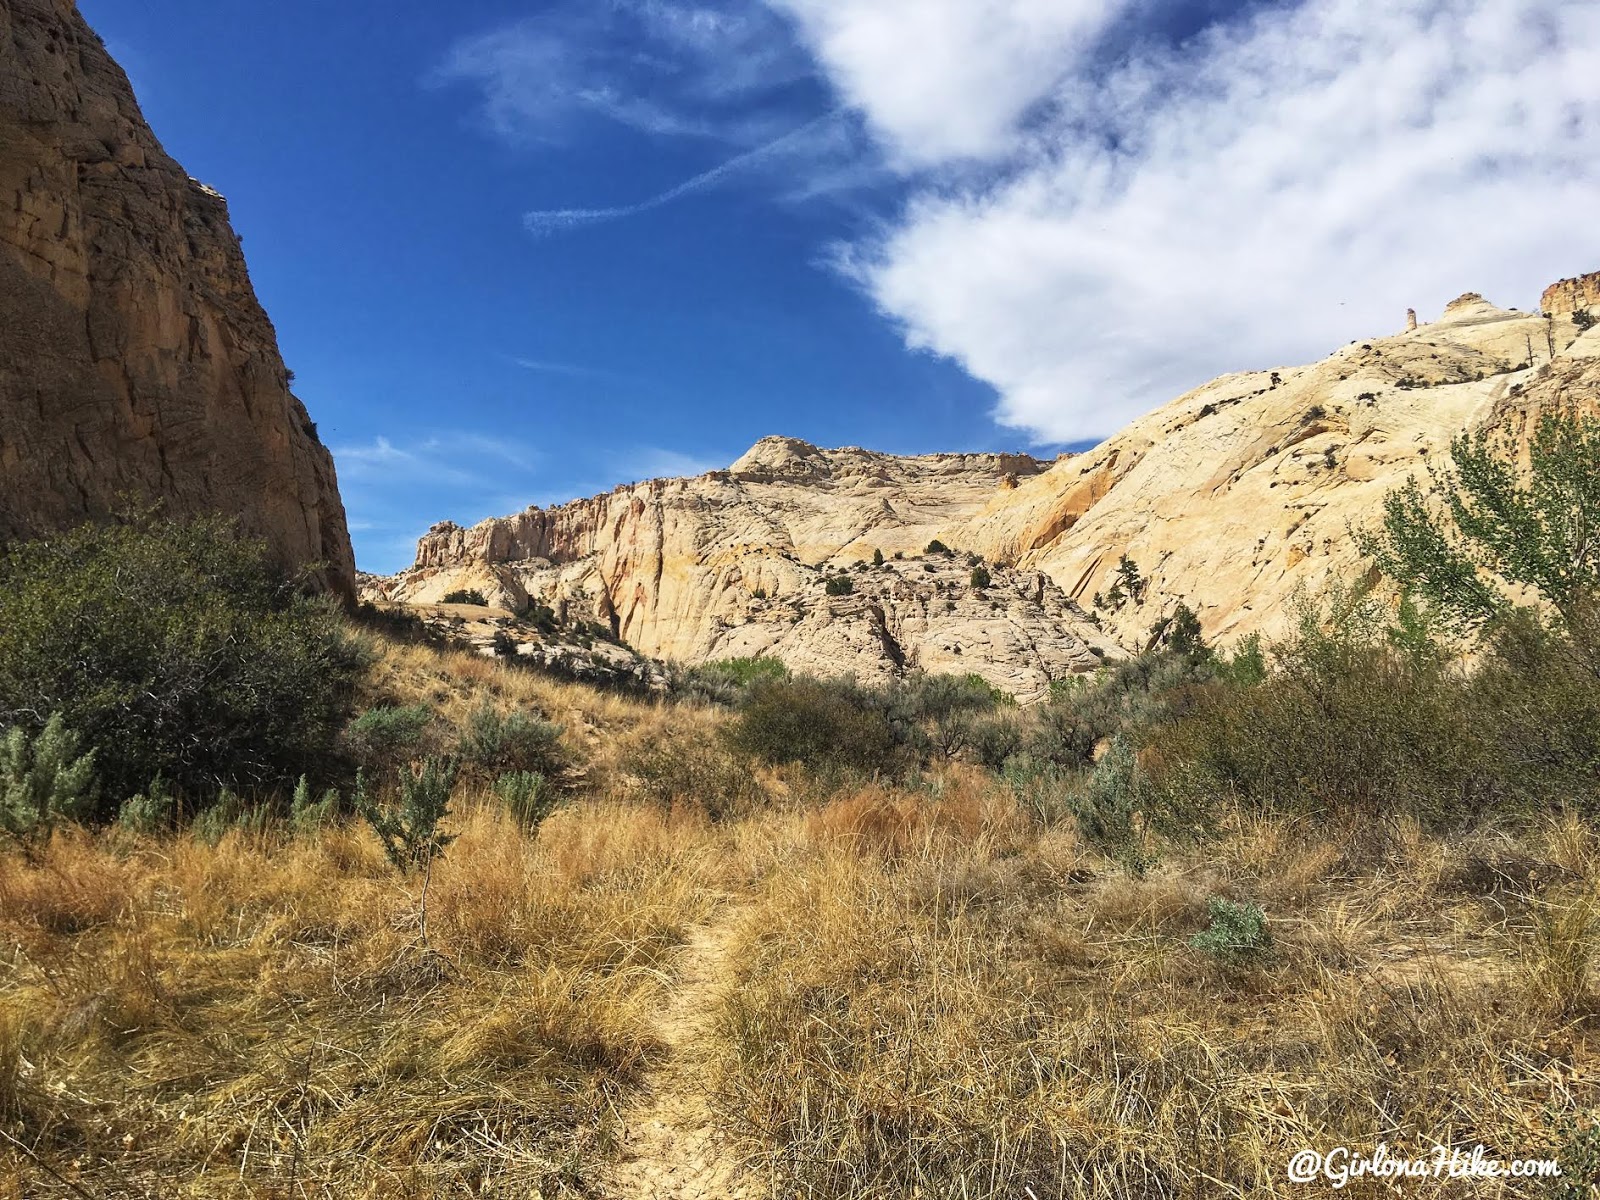 Backpacking the Escalante River Trail, Grand Staircase Escalante National Monument